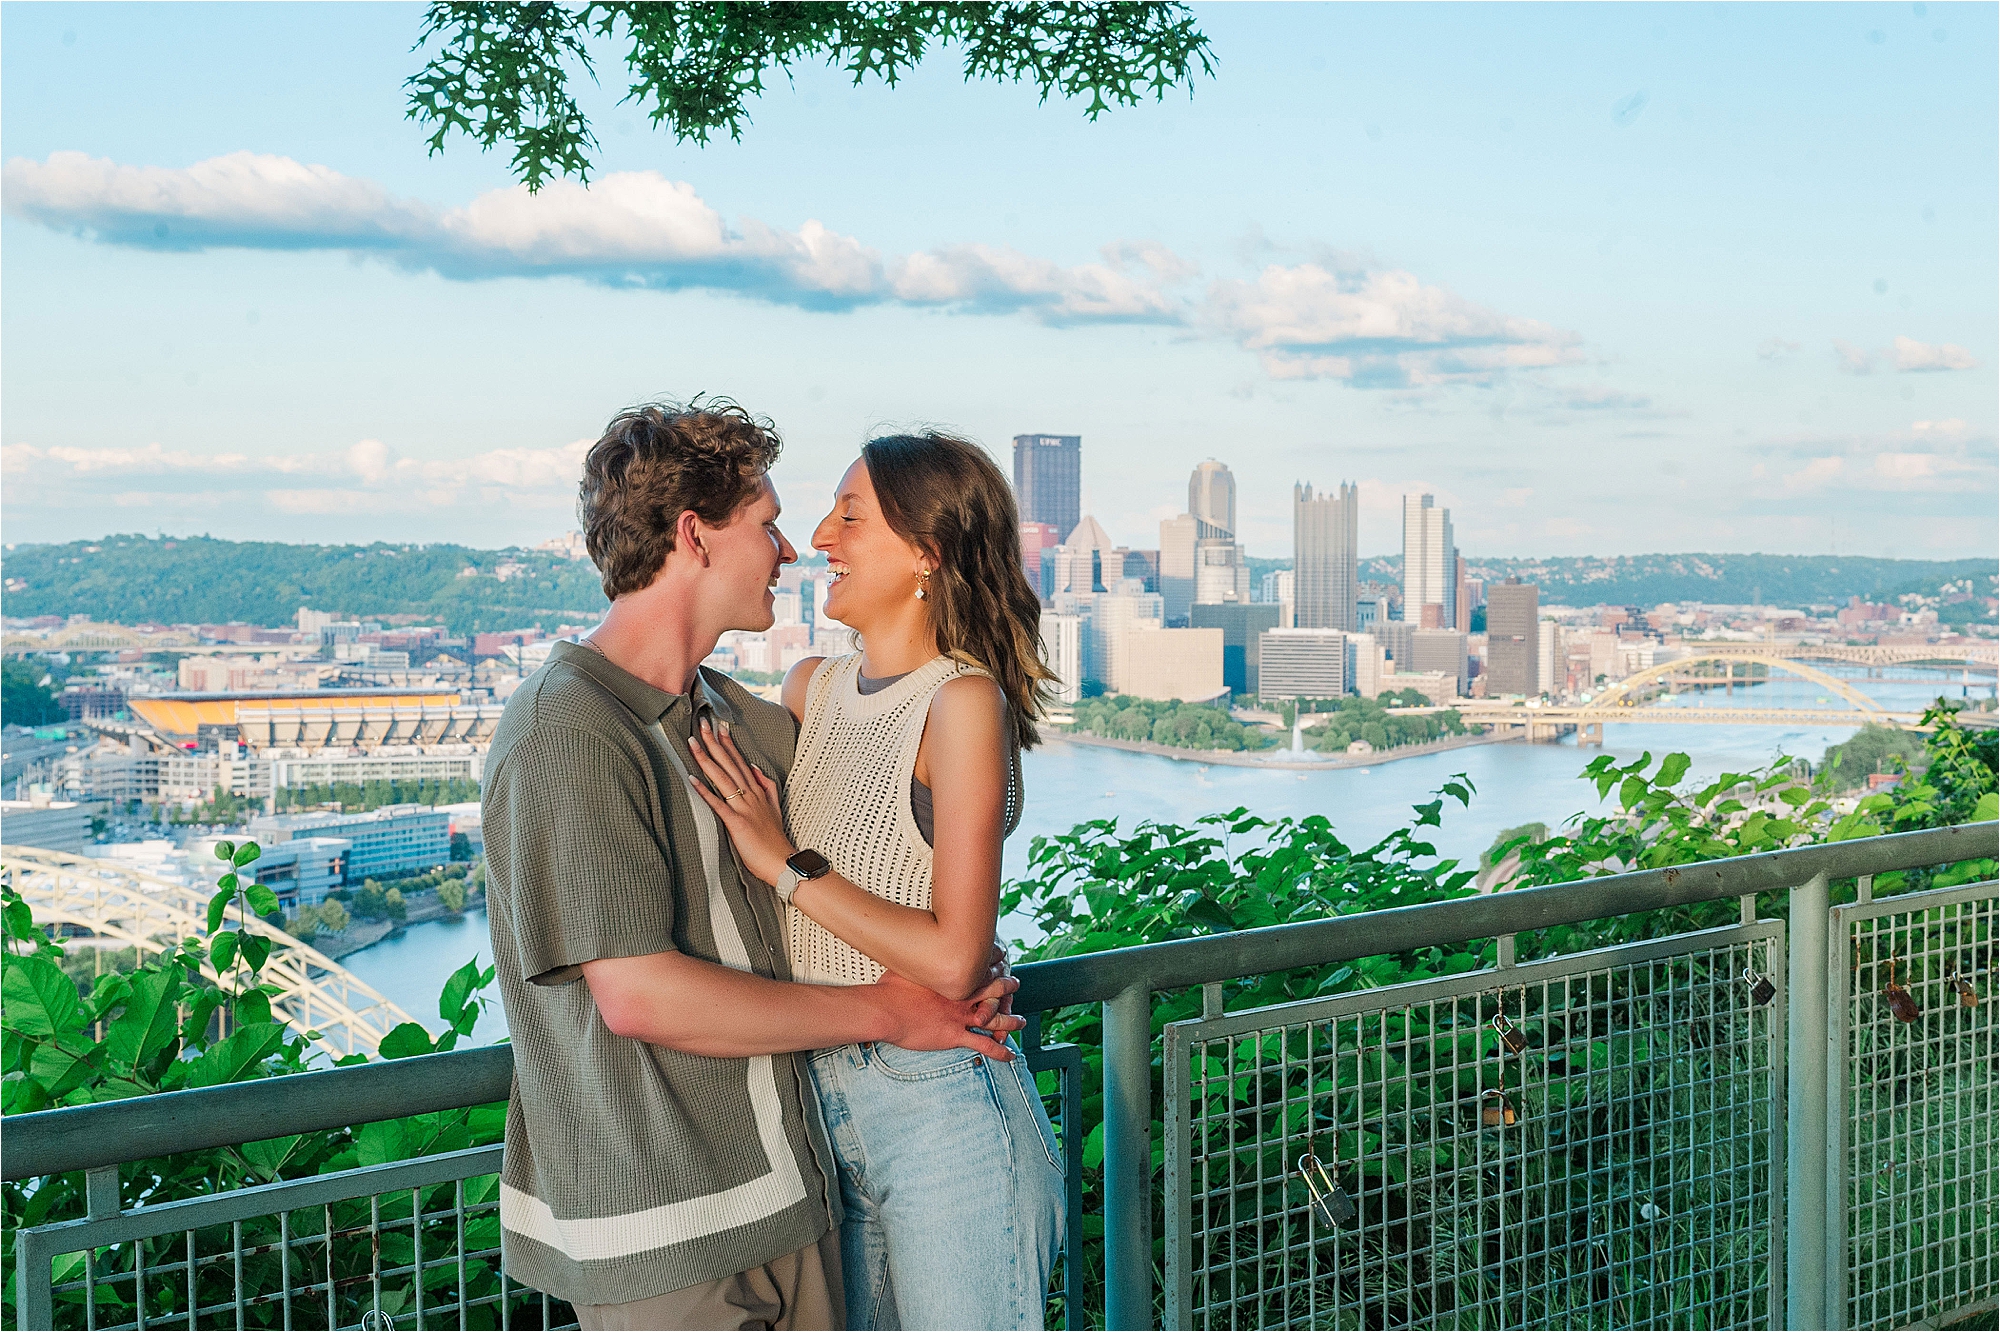 west end overlook engagement photos downtown pittsburgh skyline  • A Surprise Proposal at the West End Overlook